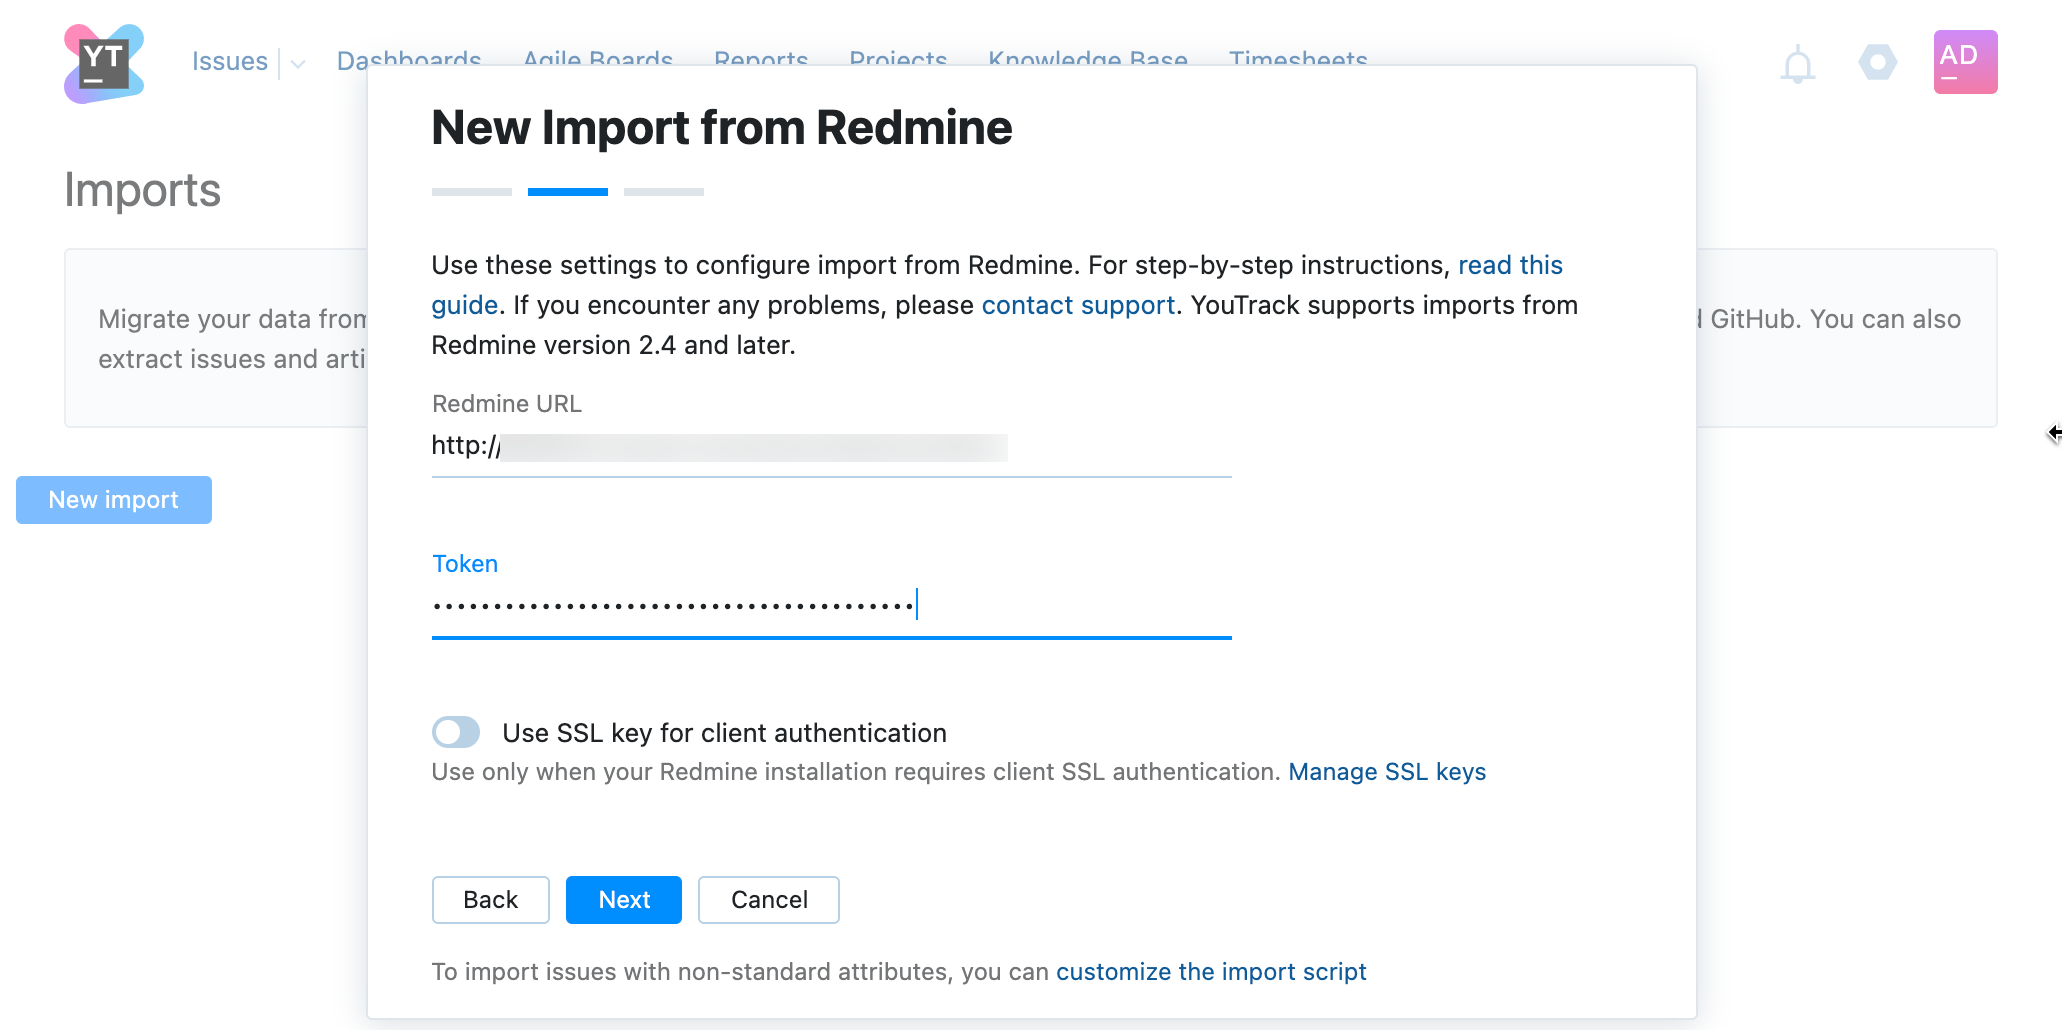 New Import from Redmine dialog.